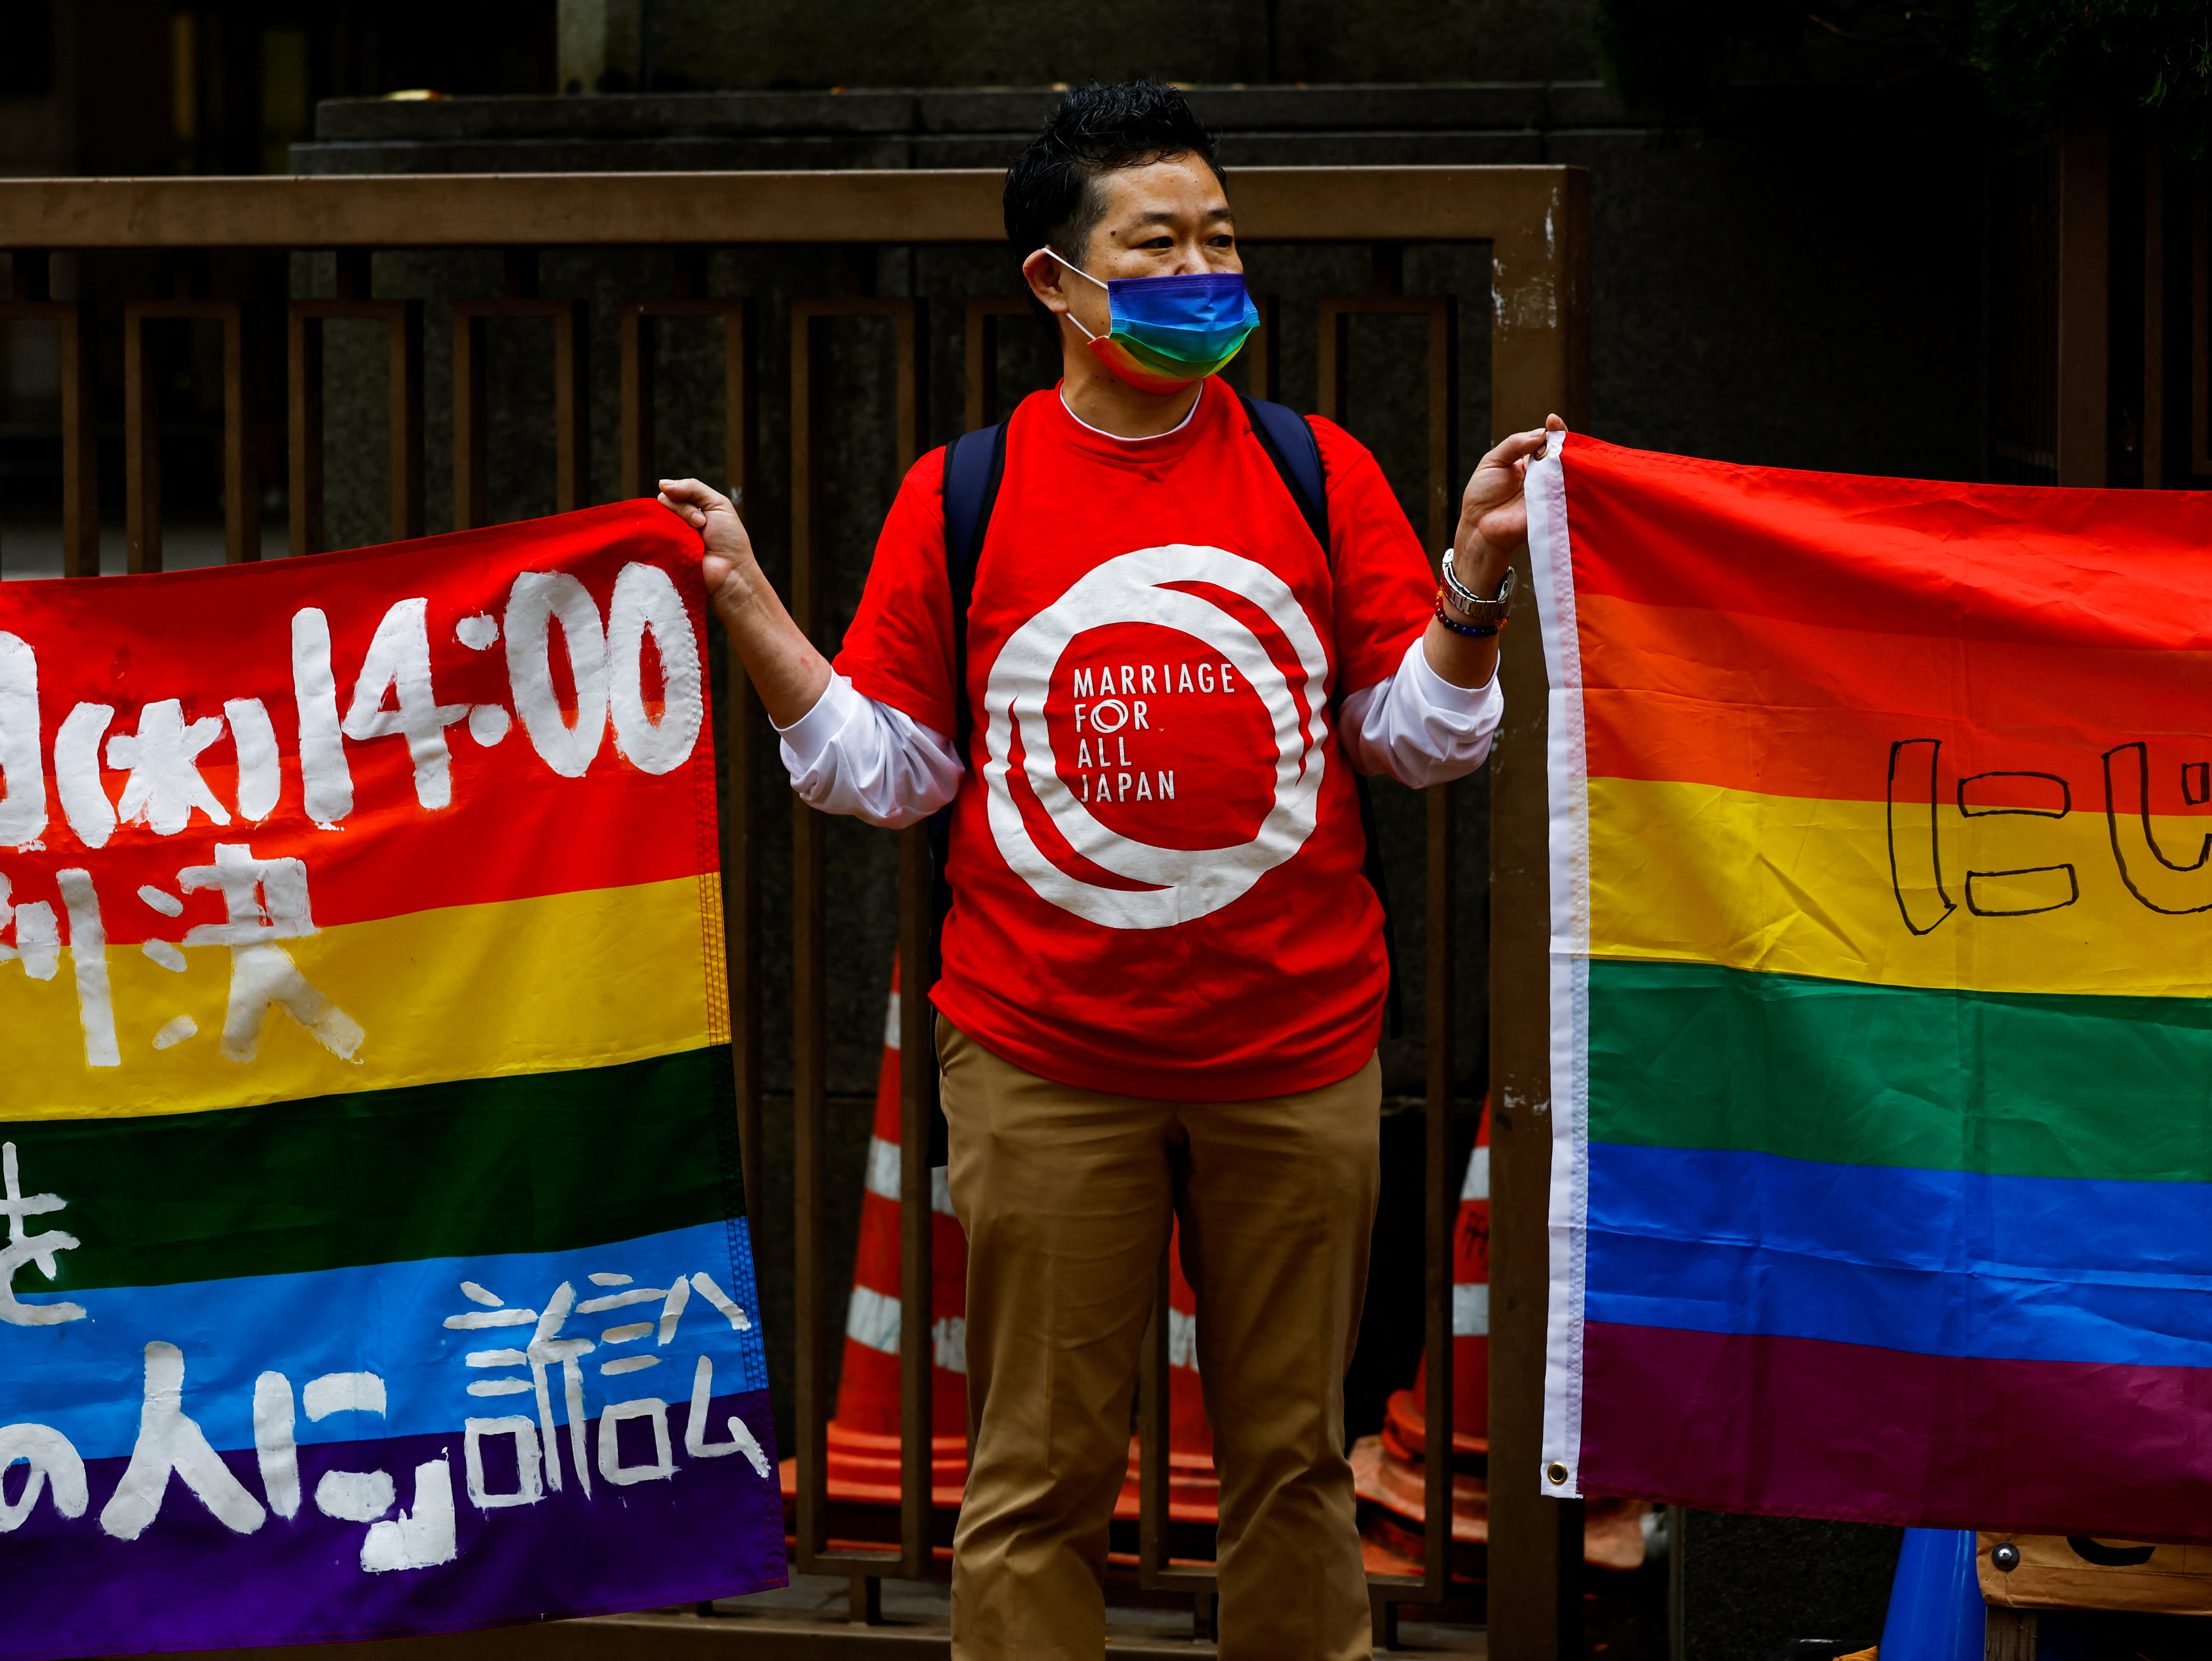 Wwxnxxxsex - Japan court upholds ban on same-sex marriage but voices rights concern |  Reuters